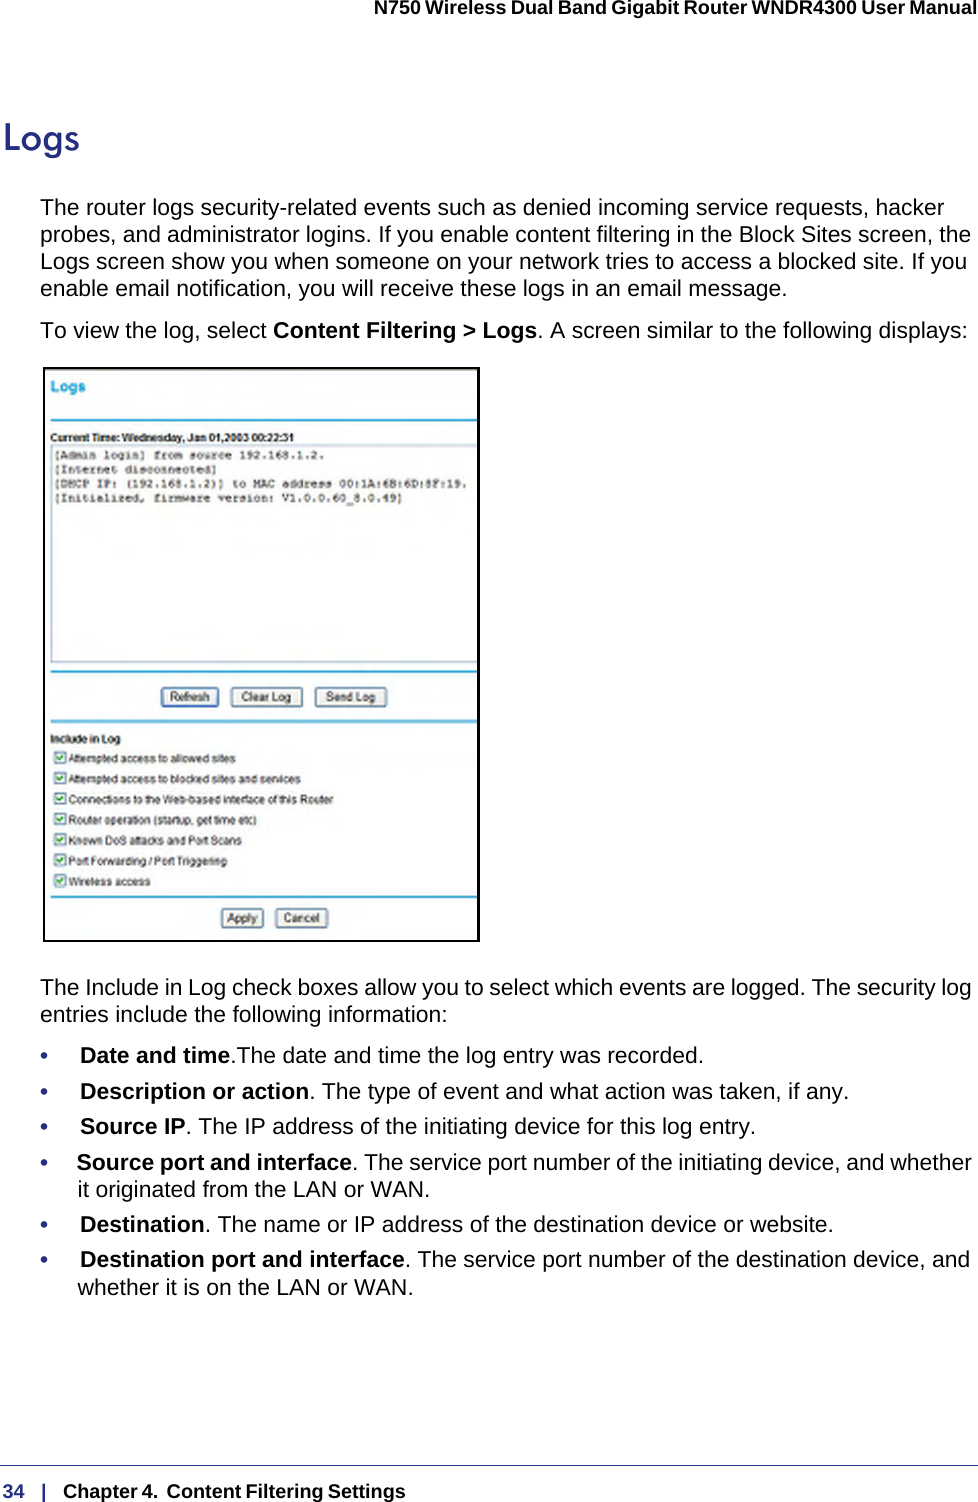 34   |   Chapter 4.  Content Filtering Settings  N750 Wireless Dual Band Gigabit Router WNDR4300 User Manual LogsThe router logs security-related events such as denied incoming service requests, hacker probes, and administrator logins. If you enable content filtering in the Block Sites screen, the Logs screen show you when someone on your network tries to access a blocked site. If you enable email notification, you will receive these logs in an email message. To view the log, select Content Filtering &gt; Logs. A screen similar to the following displays:The Include in Log check boxes allow you to select which events are logged. The security log entries include the following information:•     Date and time.The date and time the log entry was recorded.•     Description or action. The type of event and what action was taken, if any.•     Source IP. The IP address of the initiating device for this log entry.•     Source port and interface. The service port number of the initiating device, and whether it originated from the LAN or WAN.•     Destination. The name or IP address of the destination device or website.•     Destination port and interface. The service port number of the destination device, and whether it is on the LAN or WAN.